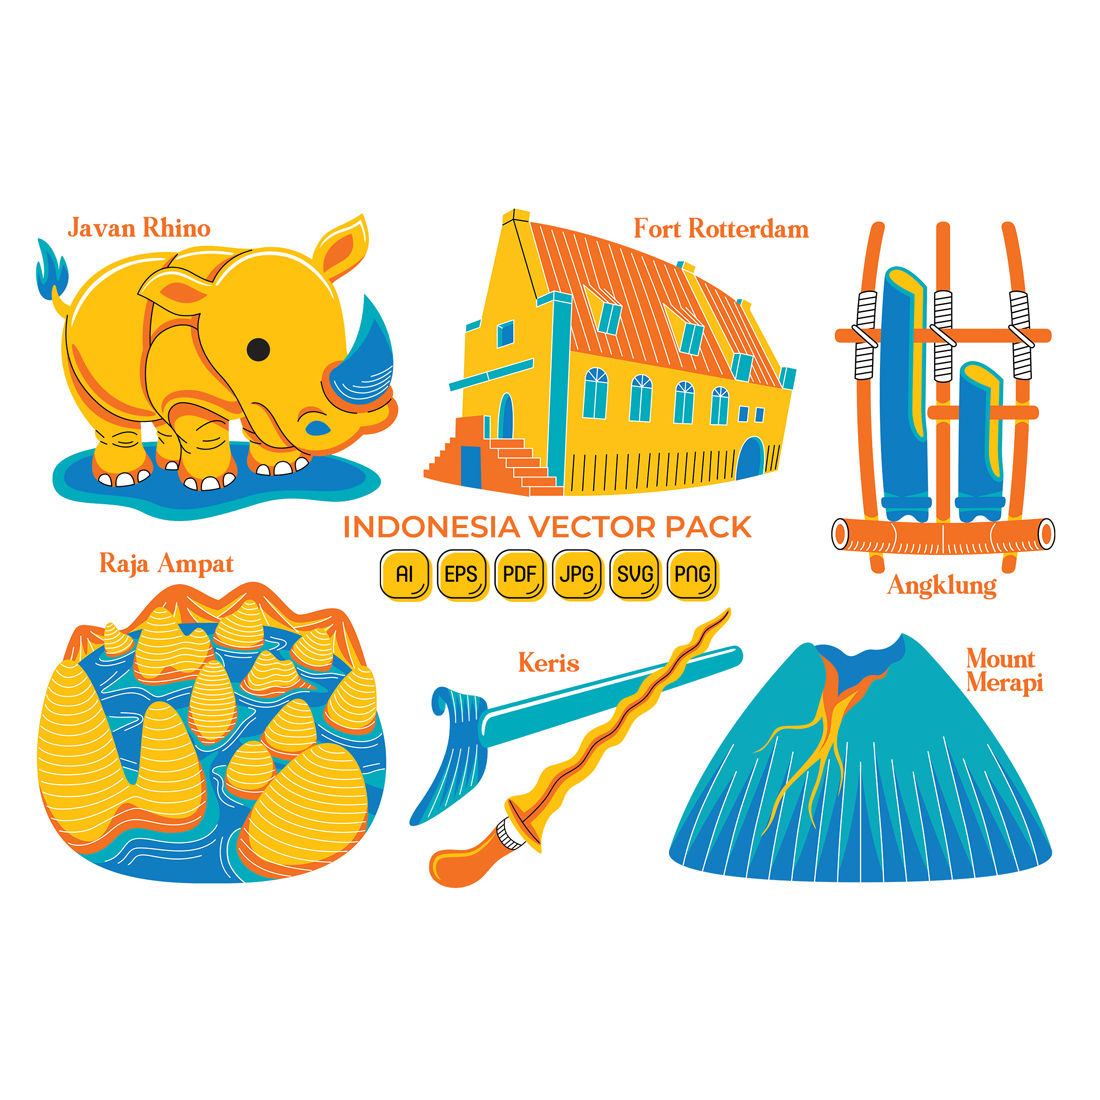 Indonesia Vector Pack #01 pinterest image.